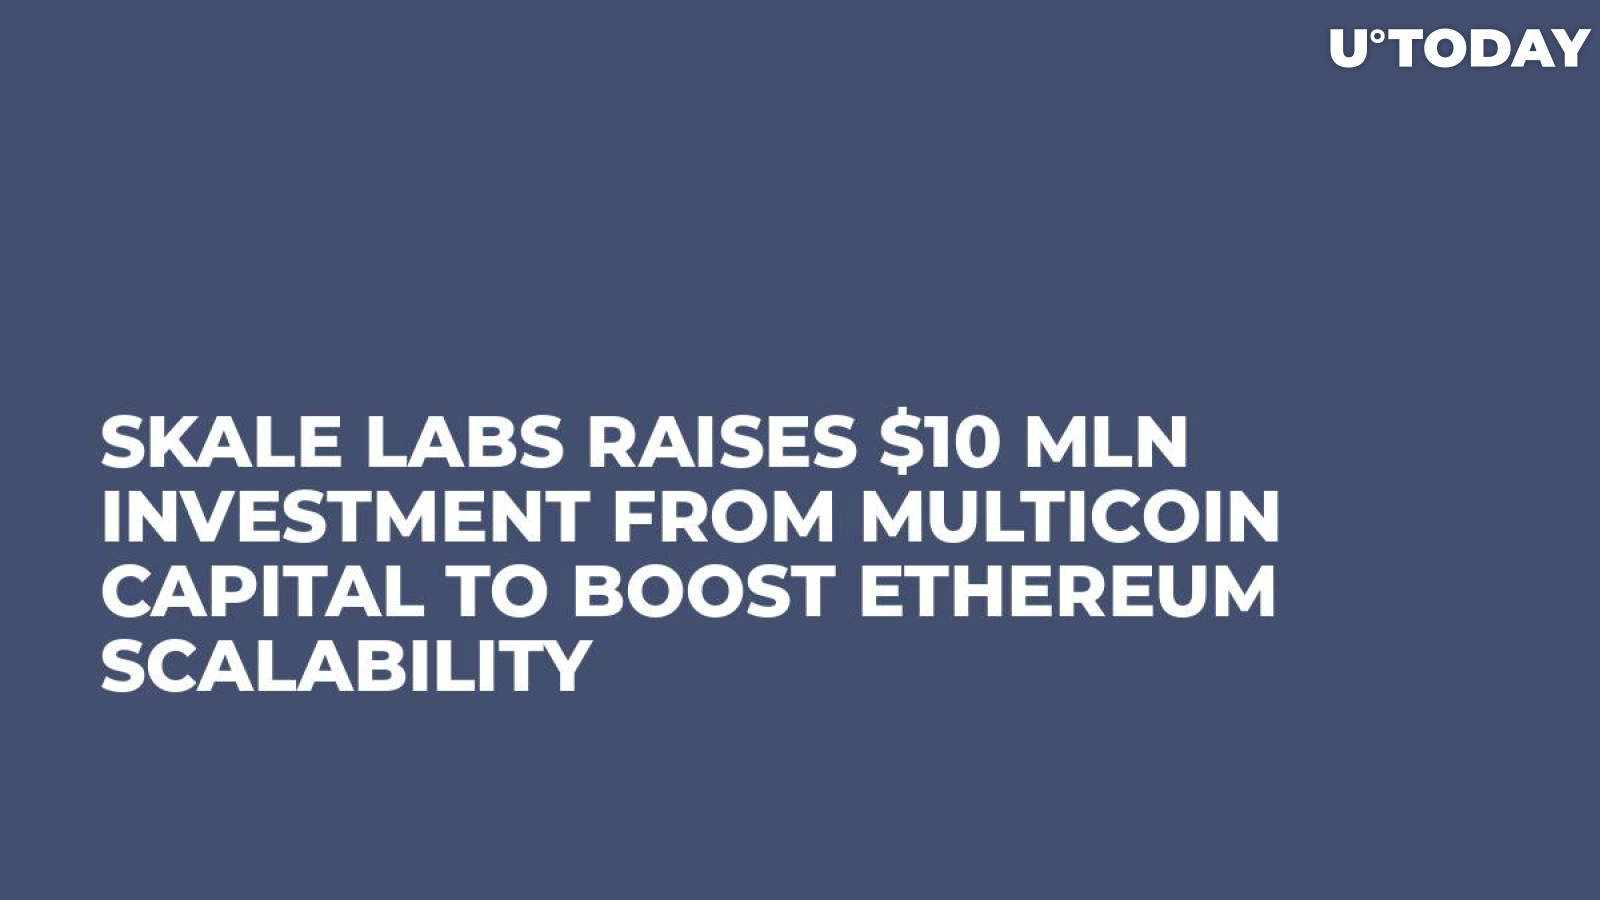 Skale Labs Raises $10 Mln Investment from Multicoin Capital to Boost Ethereum Scalability